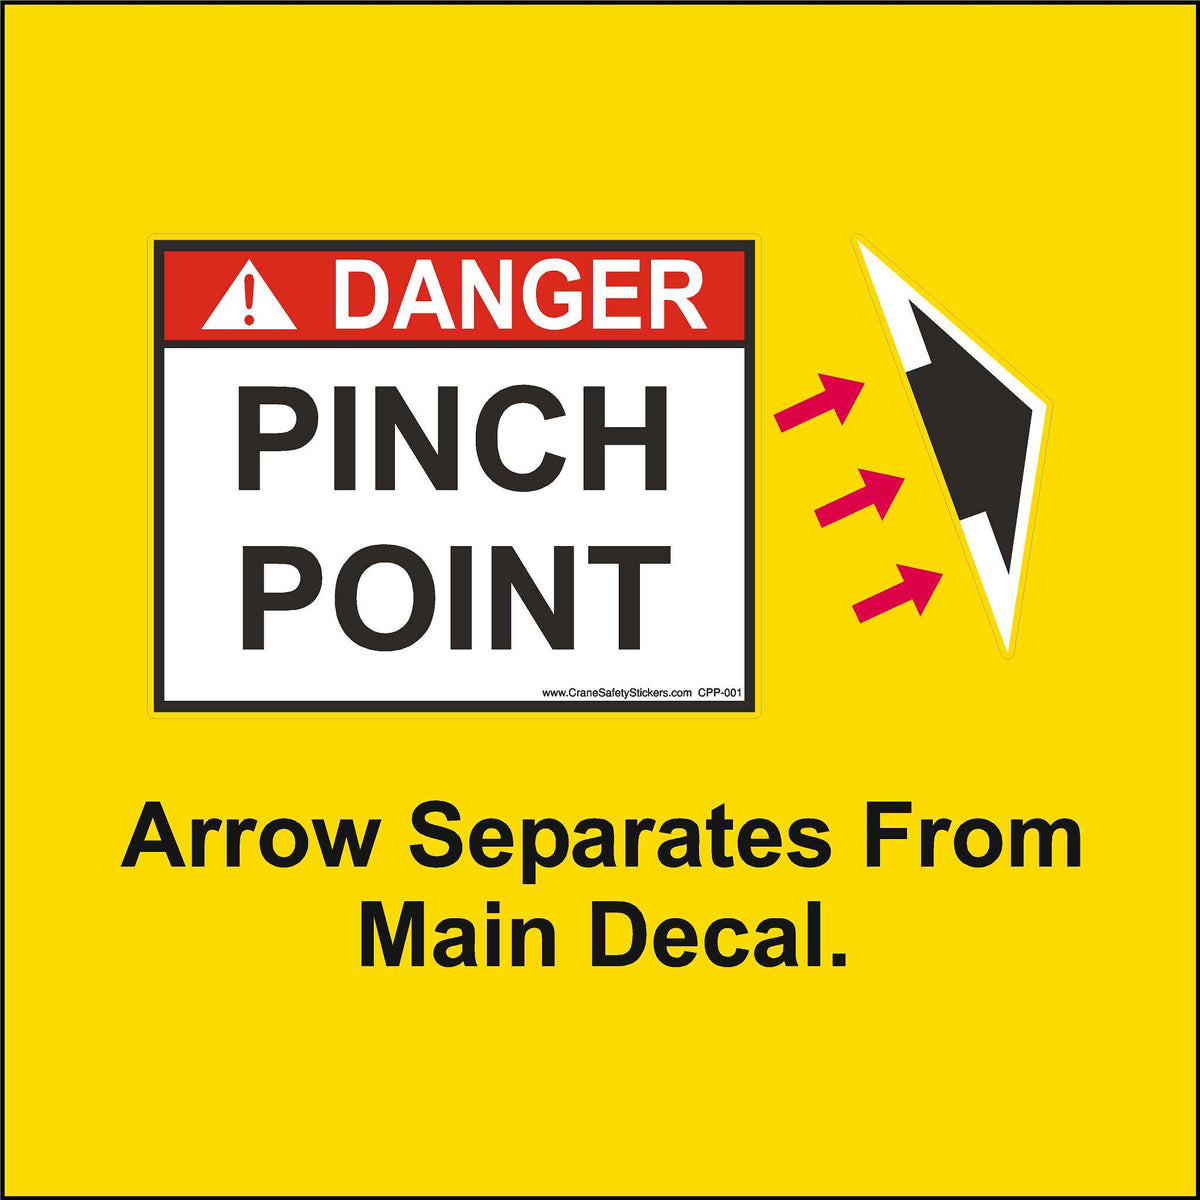 These Pinch Point Stickers have a separate arrow and this shows that you can place the arrow in any direction to reference the danger area.